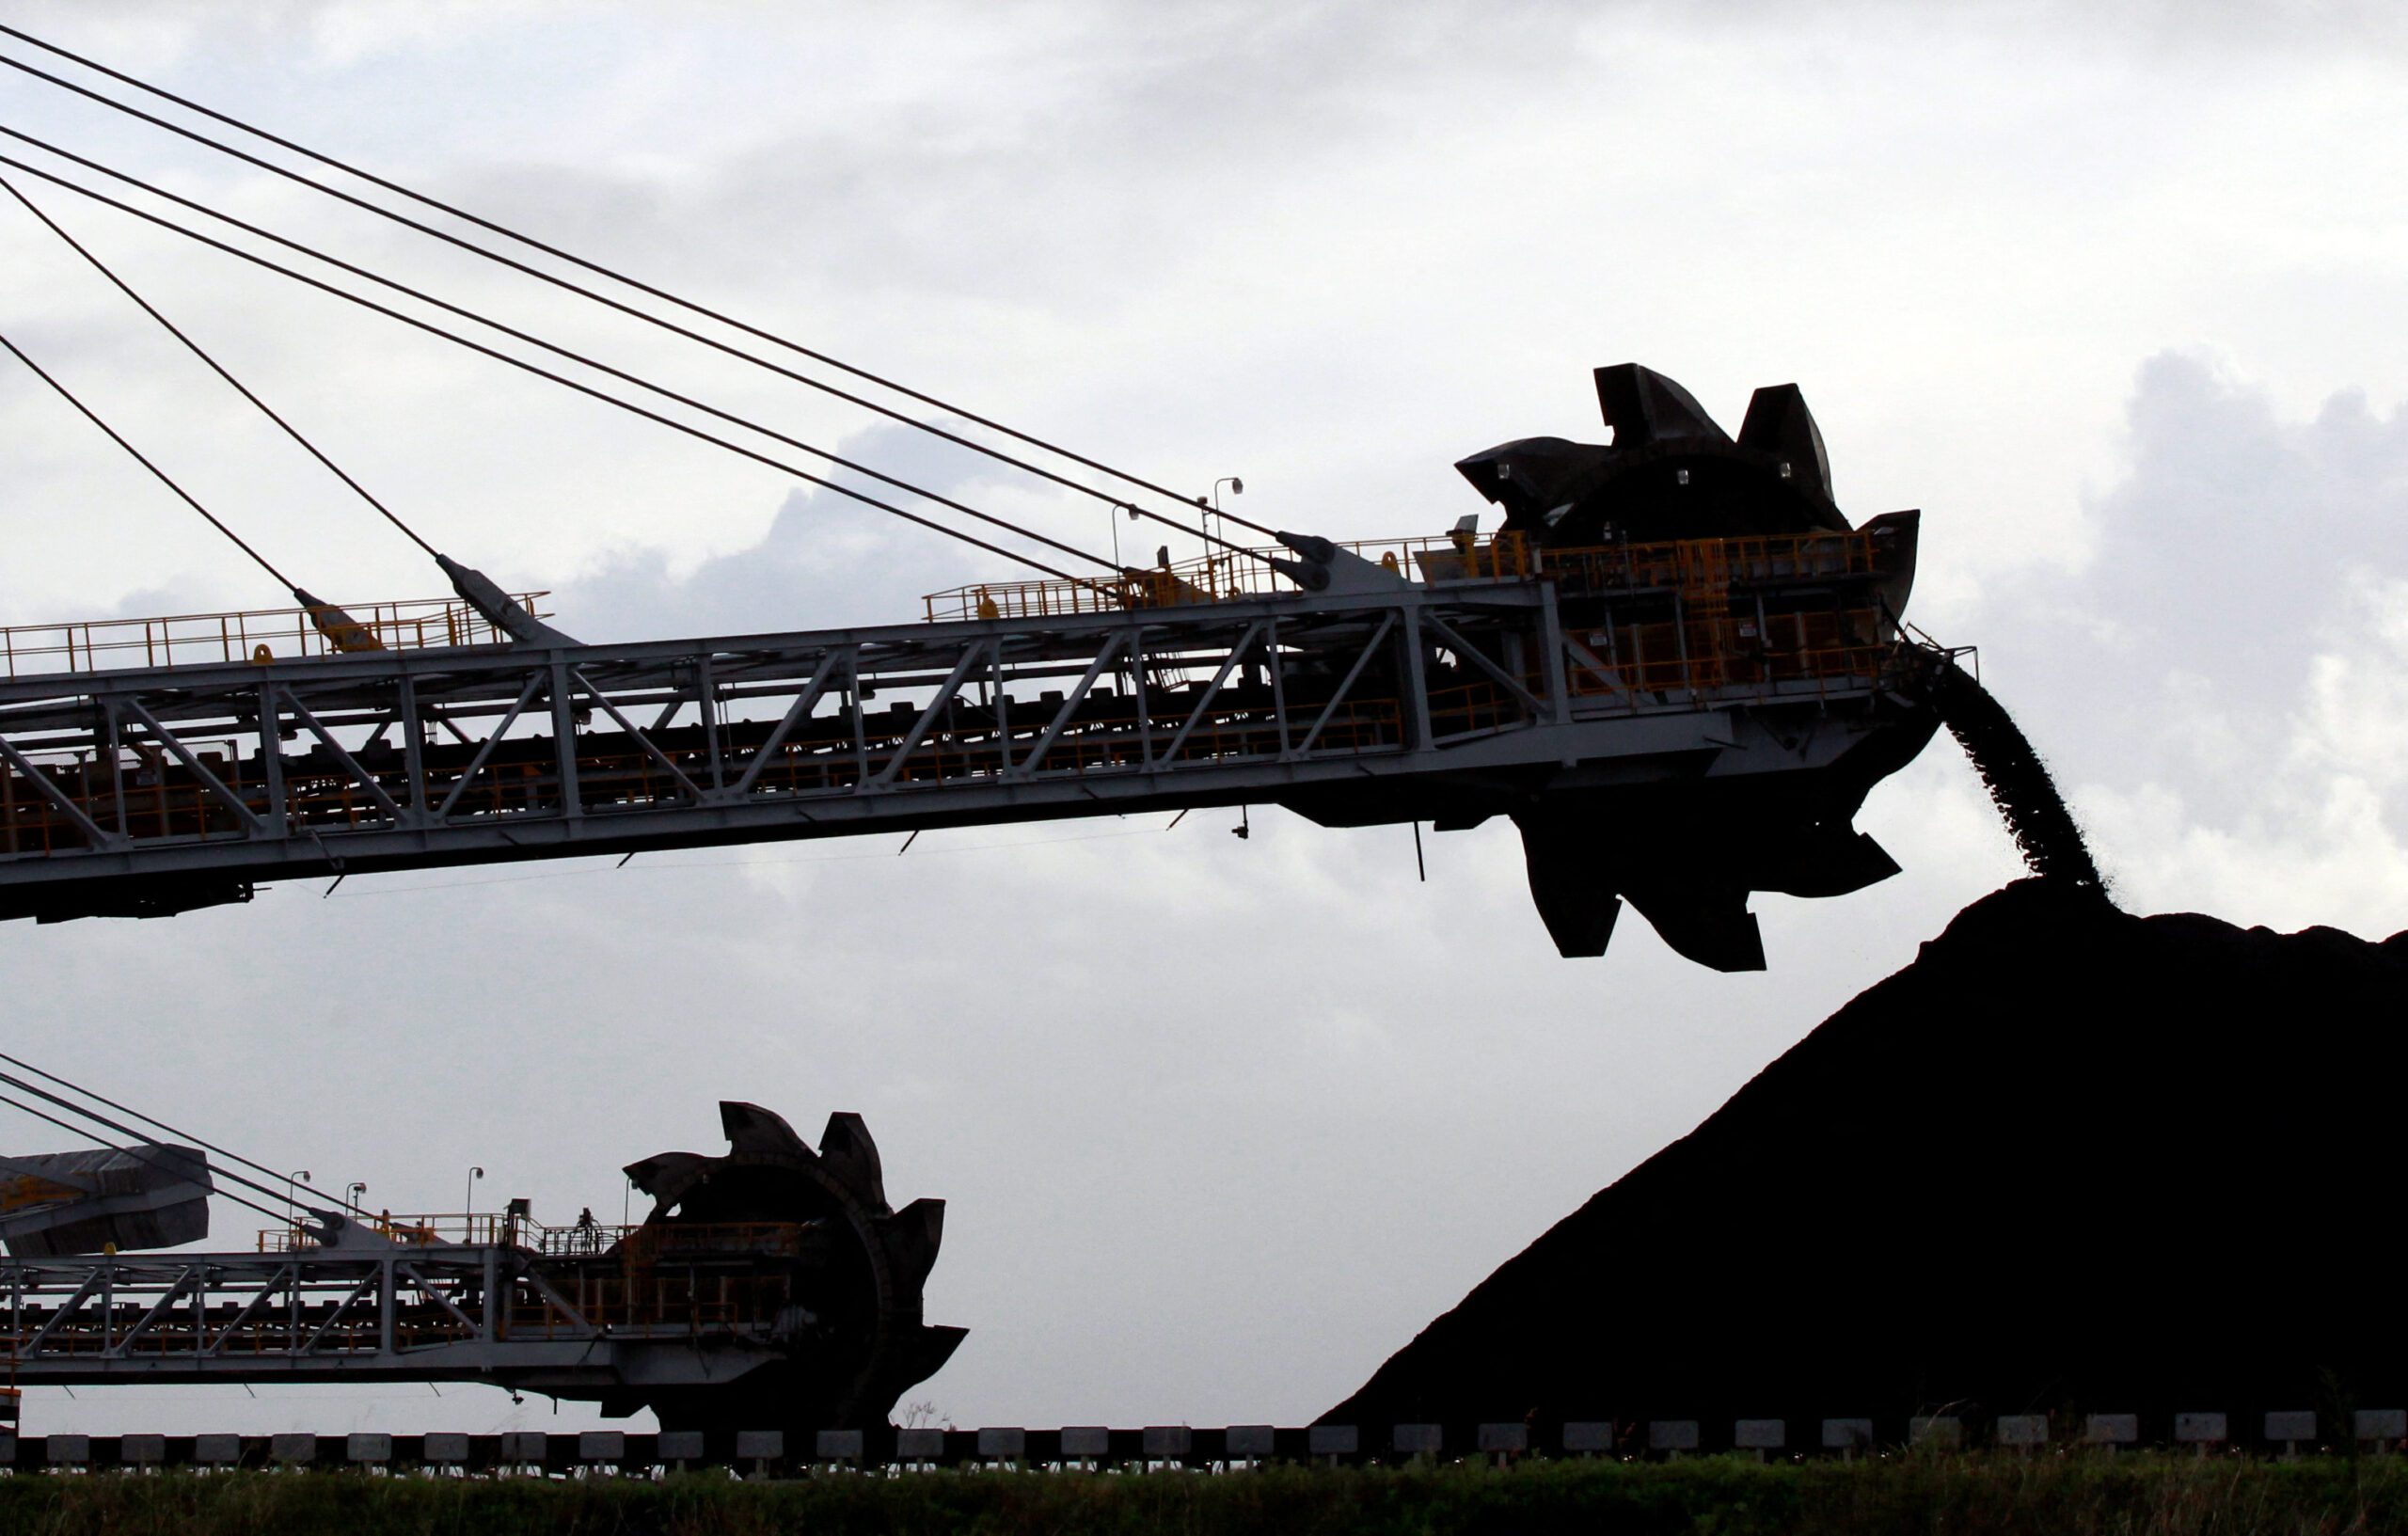 A stacker/reclaimer places coal in stockpiles at the port in Newcastle, Australia.REUTERS/File Photo